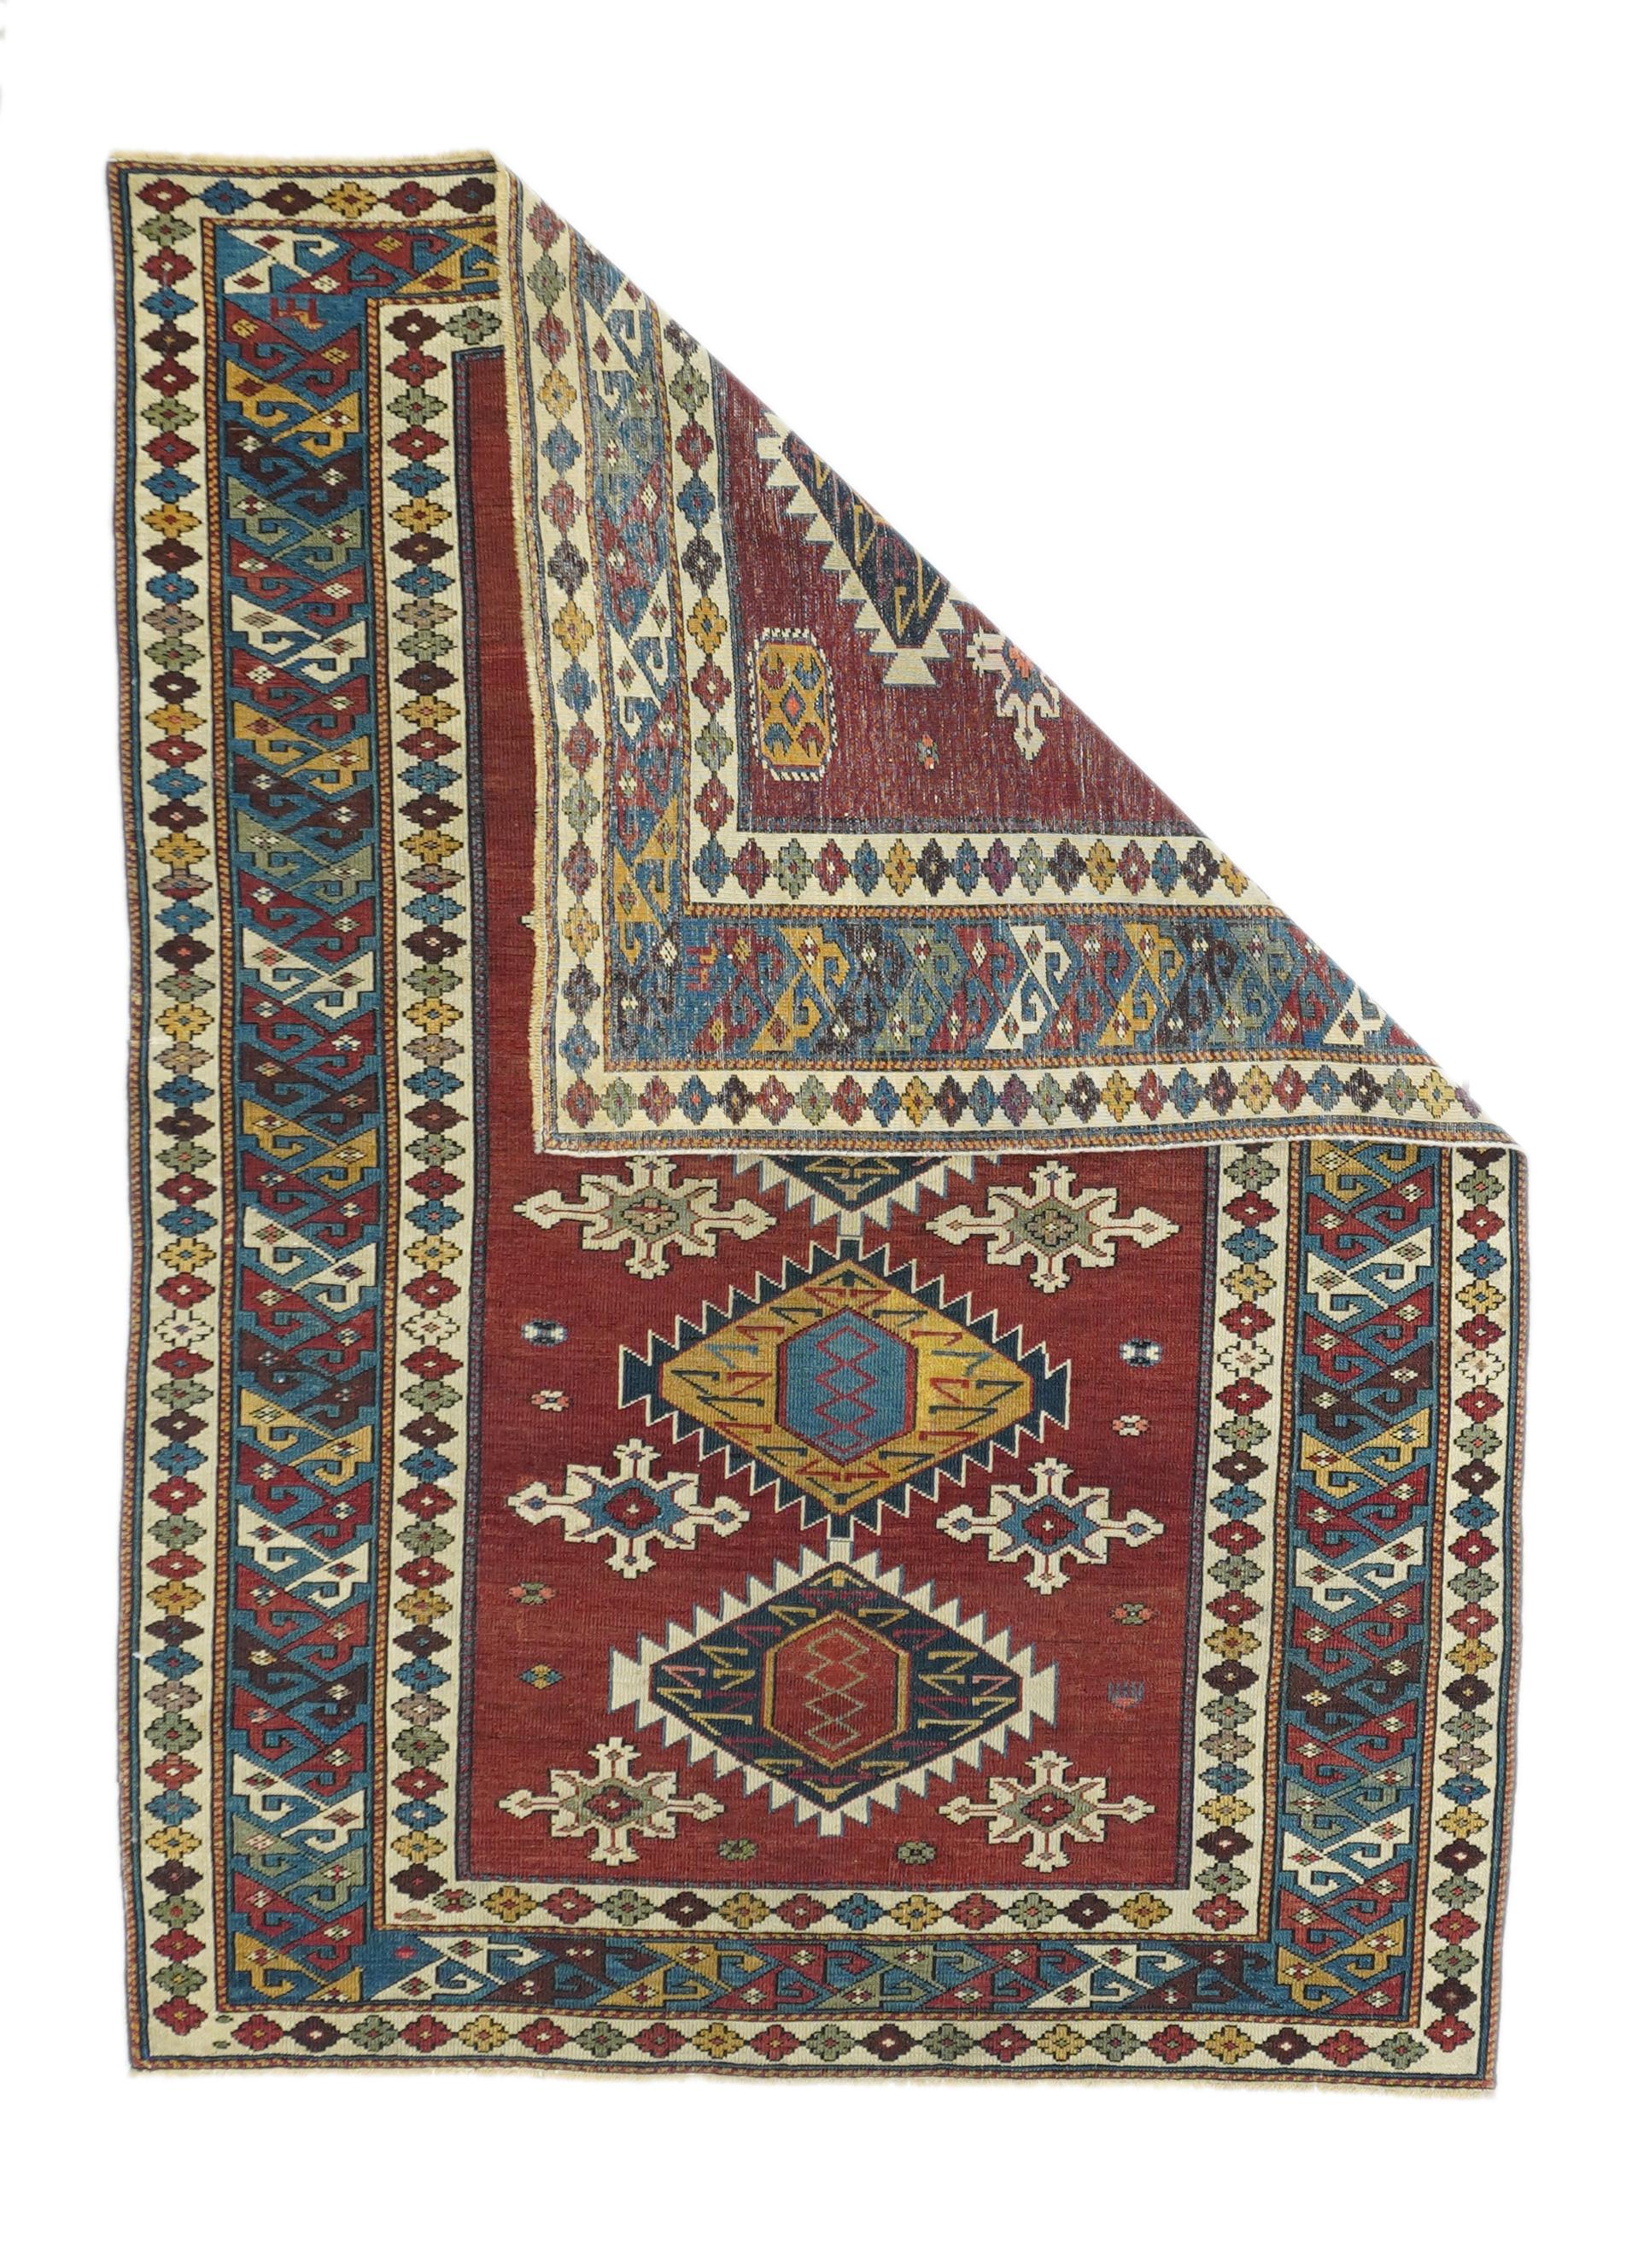 Antique Shirvan rug 3'8'' x 5'2''. The dark red field displays five deeply serrated stacked lozenges in old gold, ecru, teal blue, charcoal and red, with ivory supporting stars. Teal blue border of wedge 